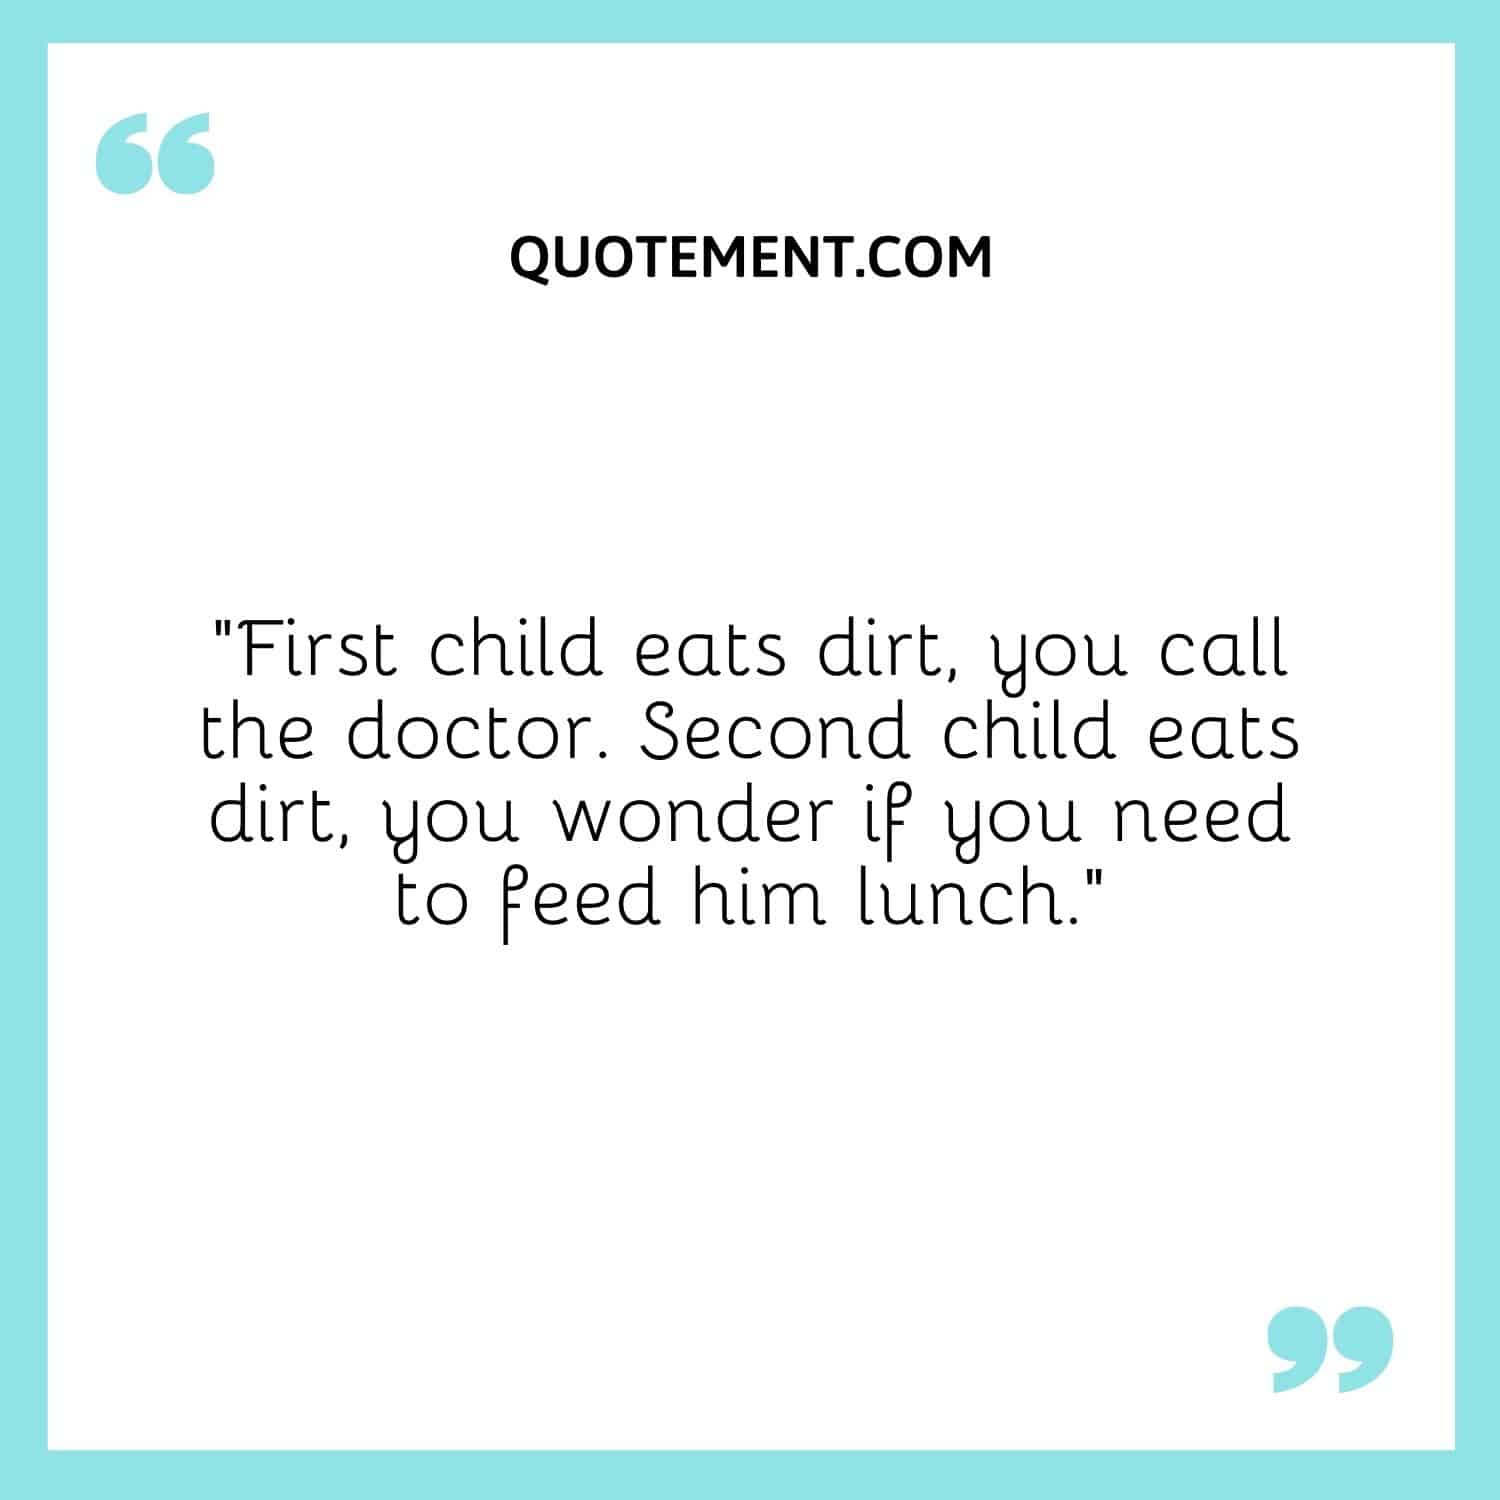 First child eats dirt, you call the doctor. Second child eats dirt, you wonder if you need to feed him lunch